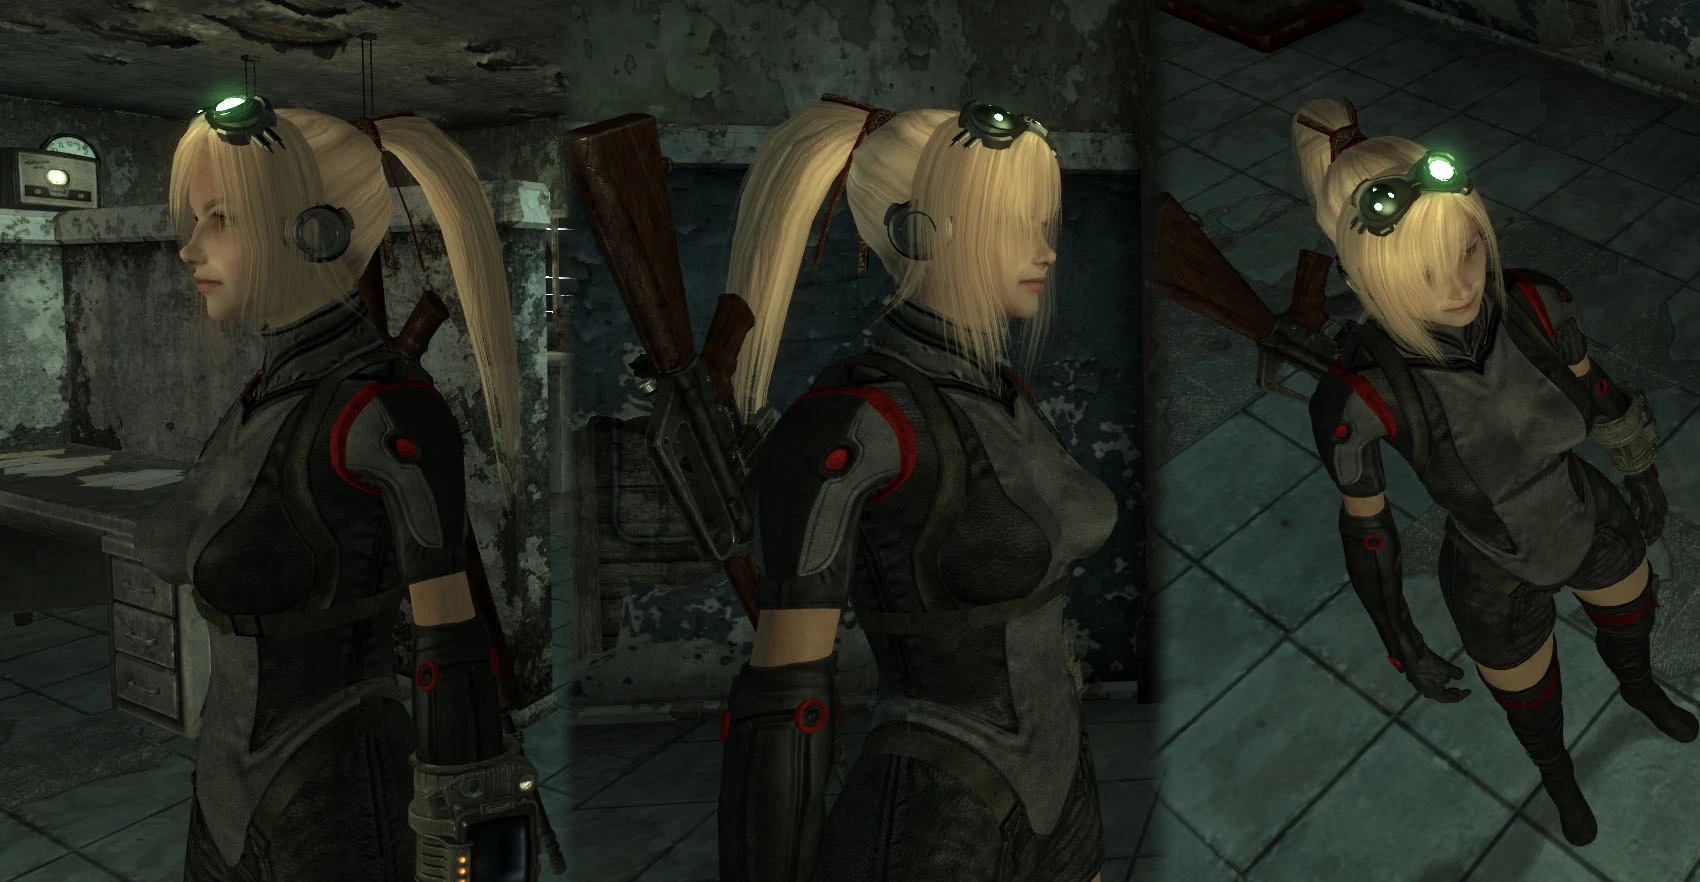 Ghost goggles for Nova Hairstyle at Fallout New Vegas.